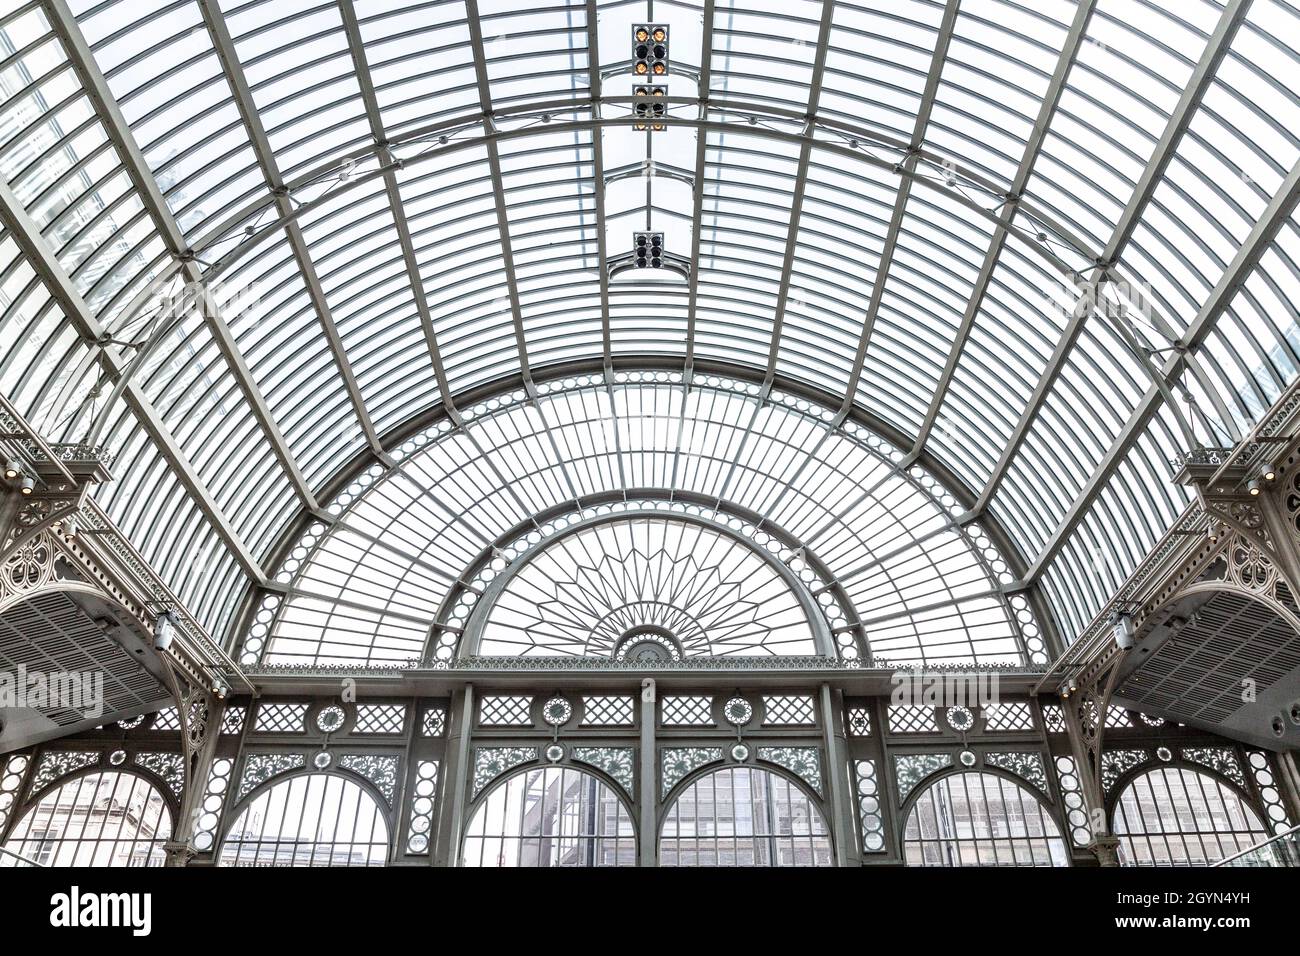 Interior of the Paul Hamlyn Hall (Floral Hall) at the Royal Opera House, Covent Garden, London, UK Stock Photo